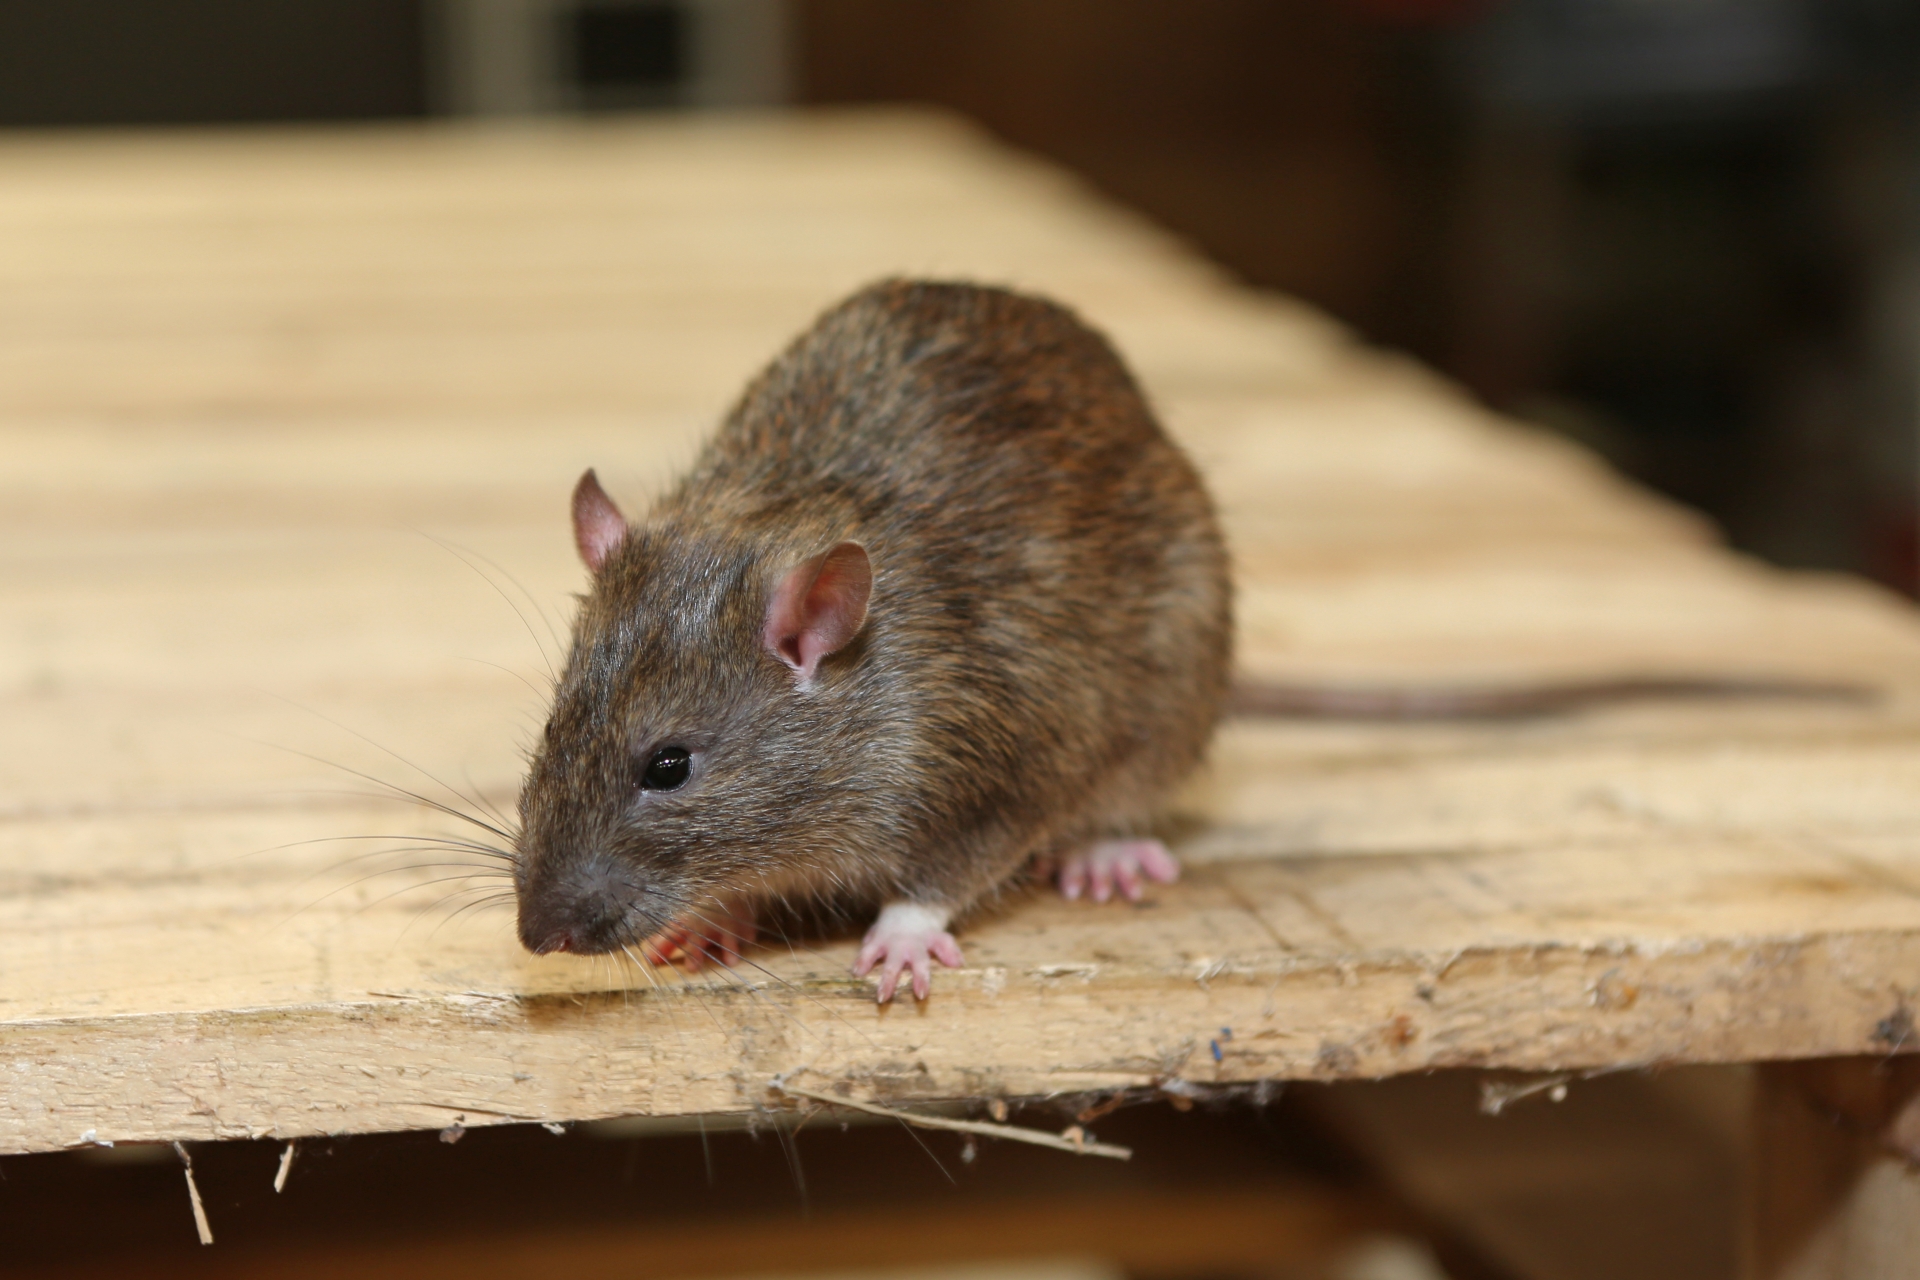 Rat Control, Pest Control in Colindale, Kingsbury, NW9. Call Now 020 8166 9746